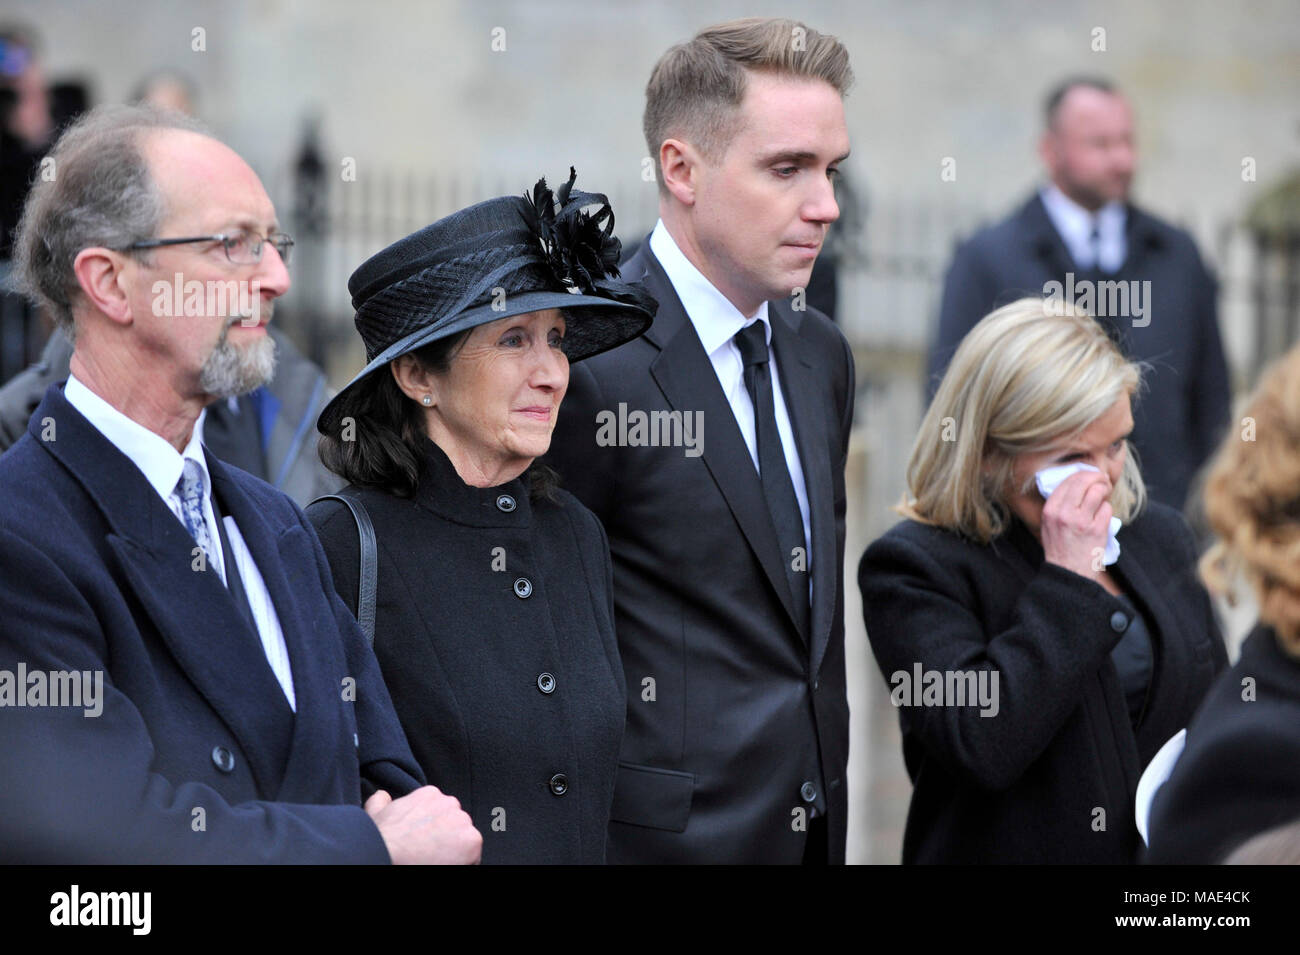 Cambridge, Britain. 31st Mar, 2018. British physicist Stephen Hawking's  first wife Jane (2nd L), son Timothy (3rd L) and daughter Lucy (4th L)  attend the private funeral of Stephen Hawking at the